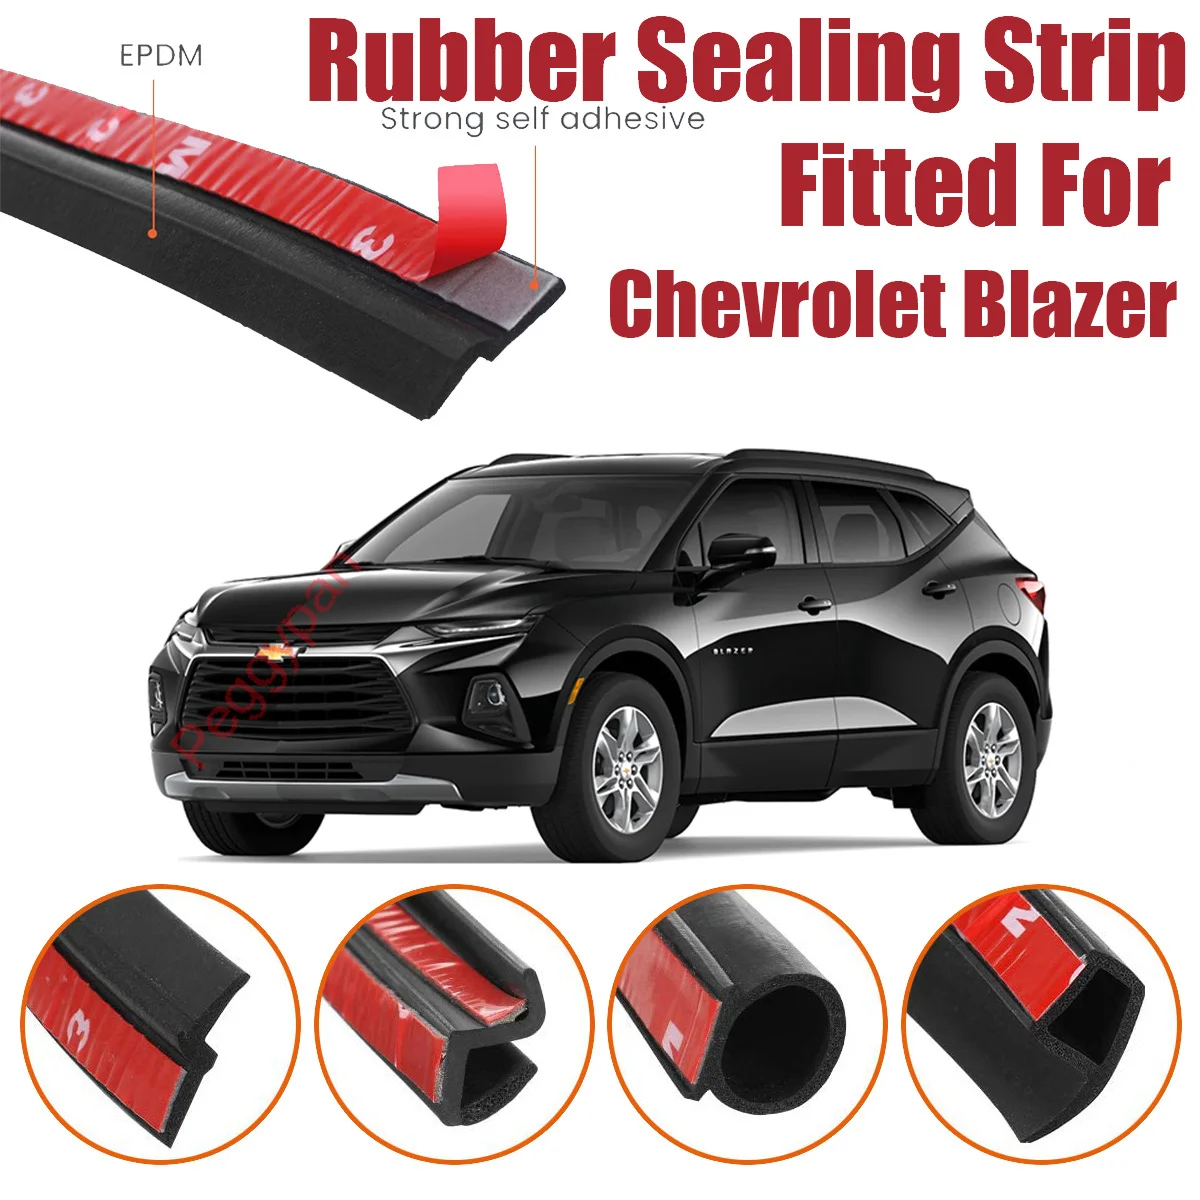 Door Seal Strip Kit Self Adhesive Window Engine Cover Soundproof Rubber Weather Draft Wind Noise Reduction For Chevrolet Blazer